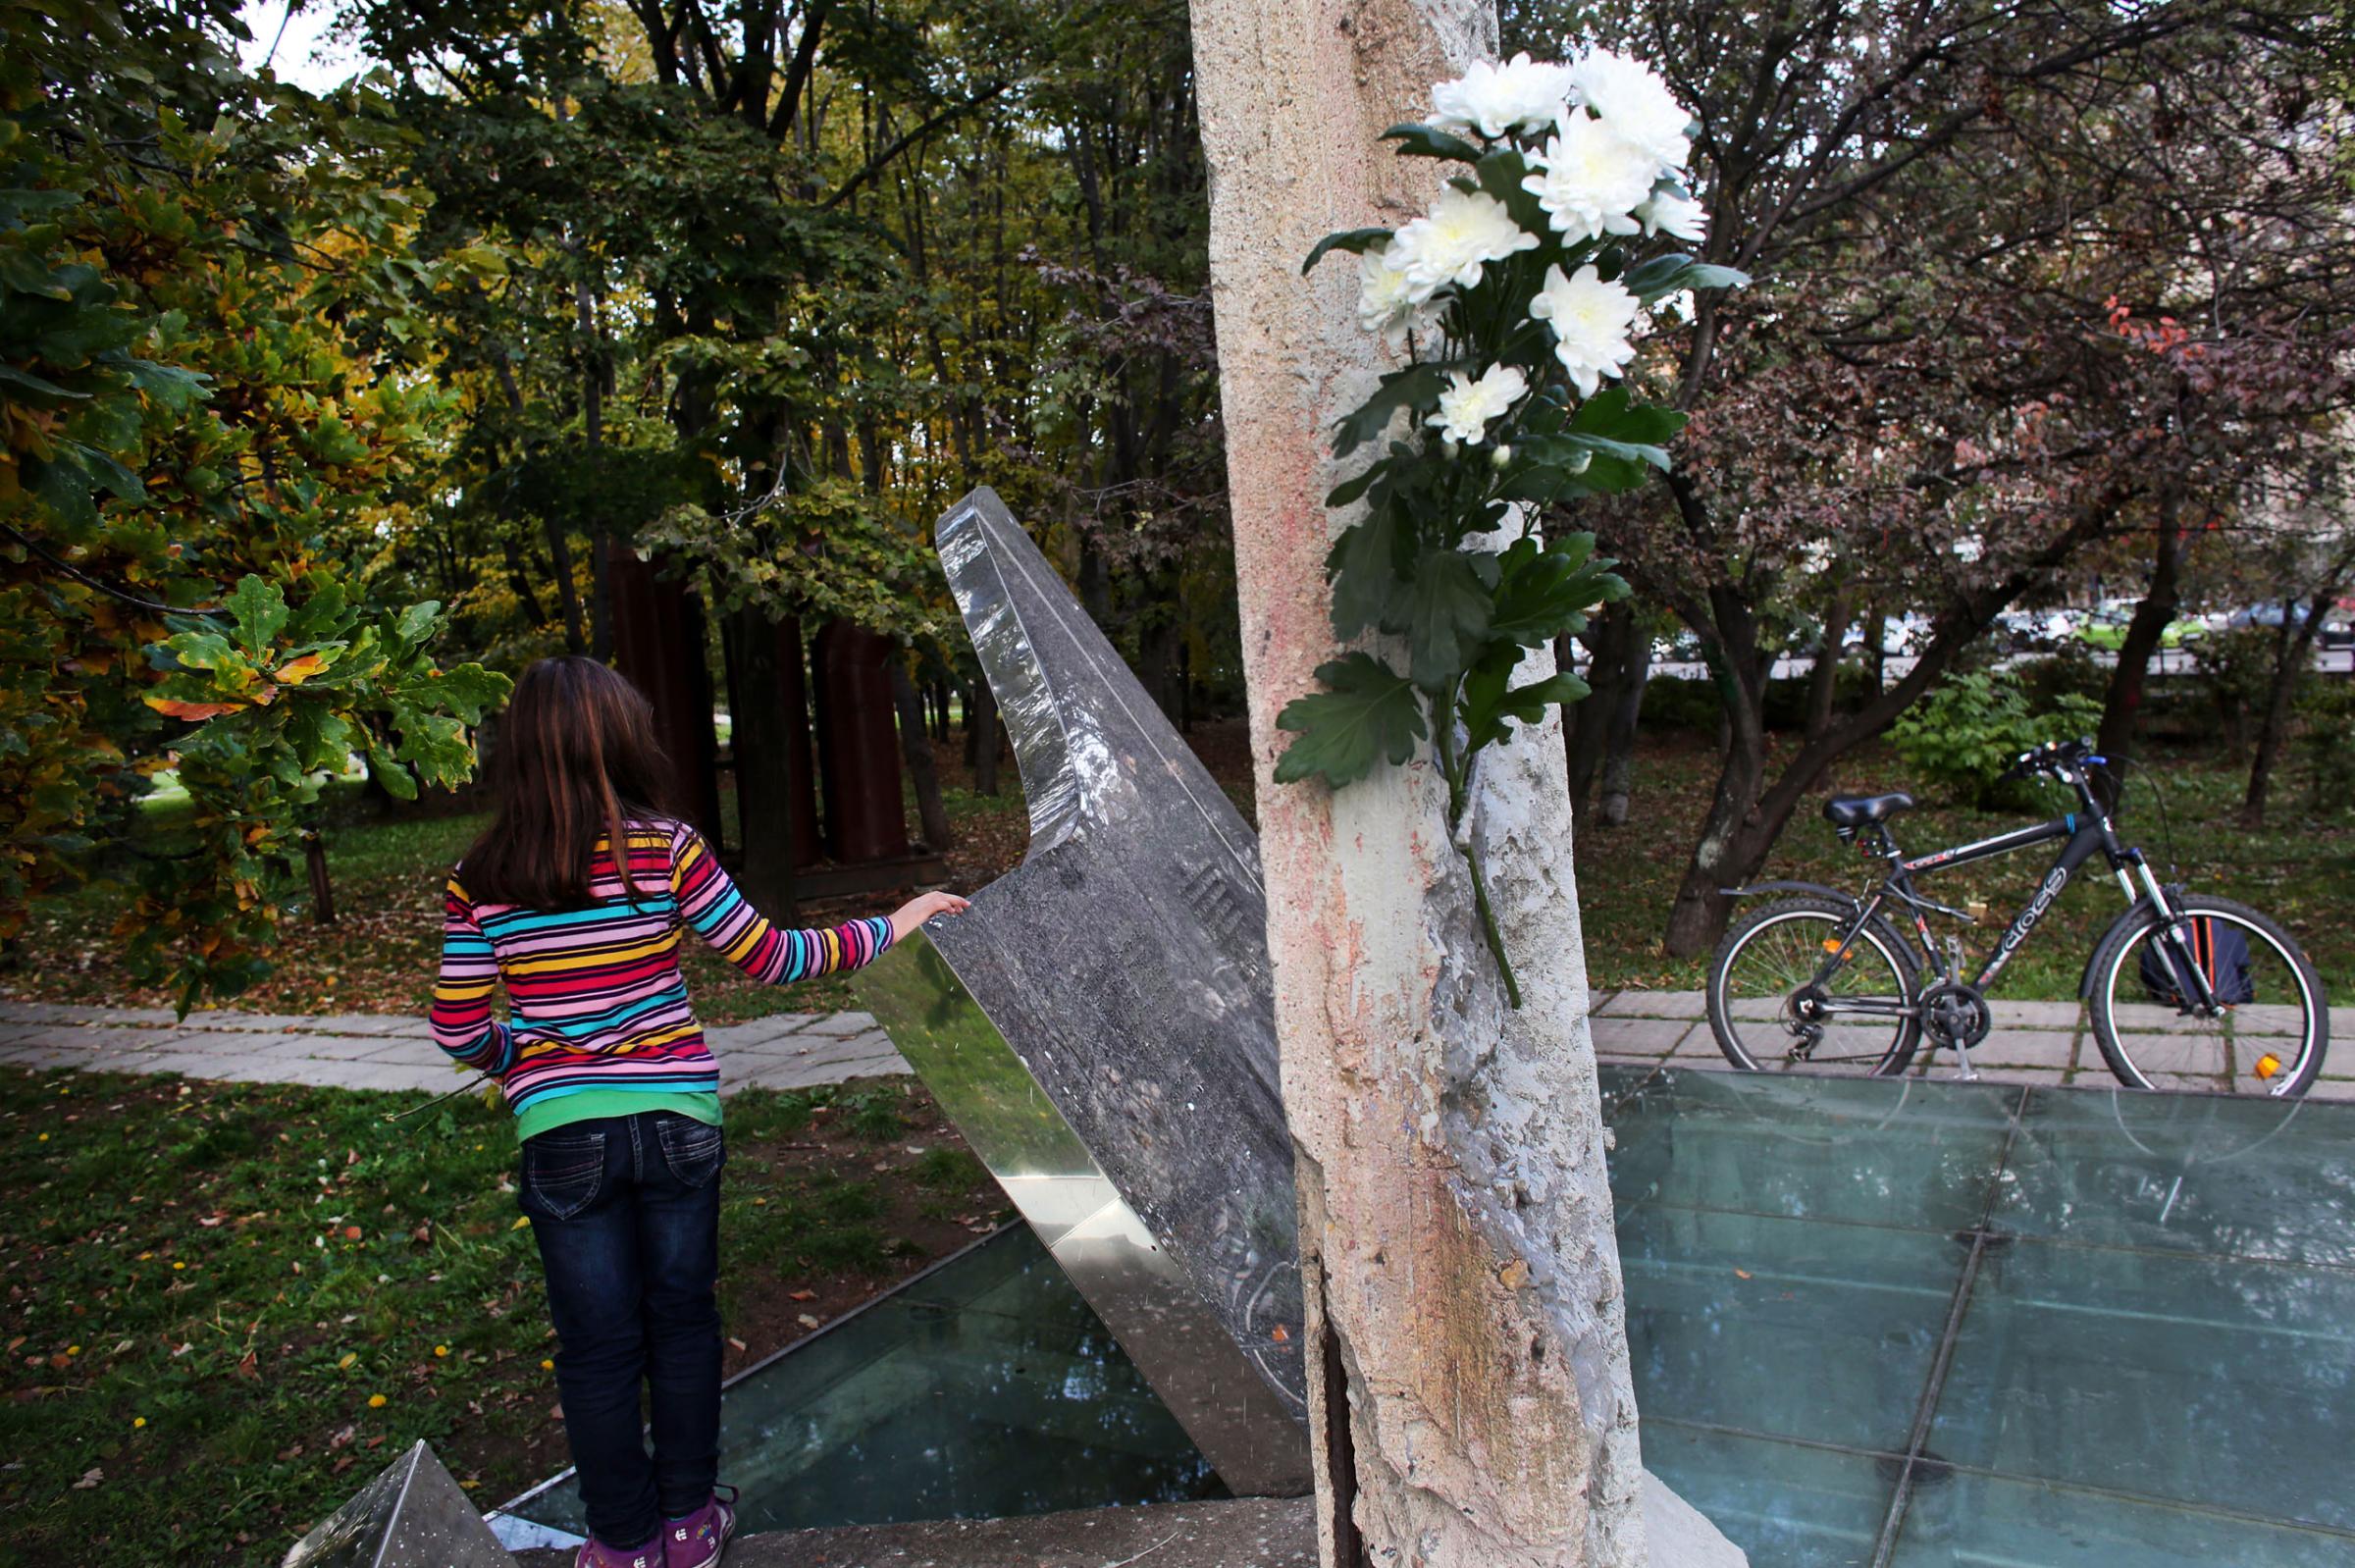 A child leans on a piece of the Berlin Wall on November 9th, 2014, the 25th anniversary of the fall of the wall. This piece was gifted to Bulgaria's capital Sofia in 2006. This photo is from a project that aims to gauge the state and effect of democracy in the former Soviet satellite nation Bulgaria, two and a half decades after the fall of the Berlin Wall. The story of democracy in Bulgaria at age 25 is a cautionary tale about transplanting one-size-fits-all Western values to a nation still undergoing social and economic upheaval. Bulgaria is still one of the poorest, most corrupt nations in the European Union, its post-1989 hopes wilted by political instability, high crime rates and skyrocketing inflation. While Bulgarians can now freely vote and protest without much threat to their freedom, their new oppressor is corruption - which is at a 15 year high, across political and civil sectors alike. The ennui is so casually etched on the passerby's face that it becomes routine - one that fits in sadly well against a startling backdrop of rotting architecture, joblessness, and a vast population decline. Despite what democracy has changed in Bulgaria, the daily struggles of its populace remain largely untouched, trapped in a post-communist time capsule.This project was supported by a grant from The Pulitzer Center on Crisis Reporting. Photo by: Yana PaskovaCopyright © Yana Paskova 2014